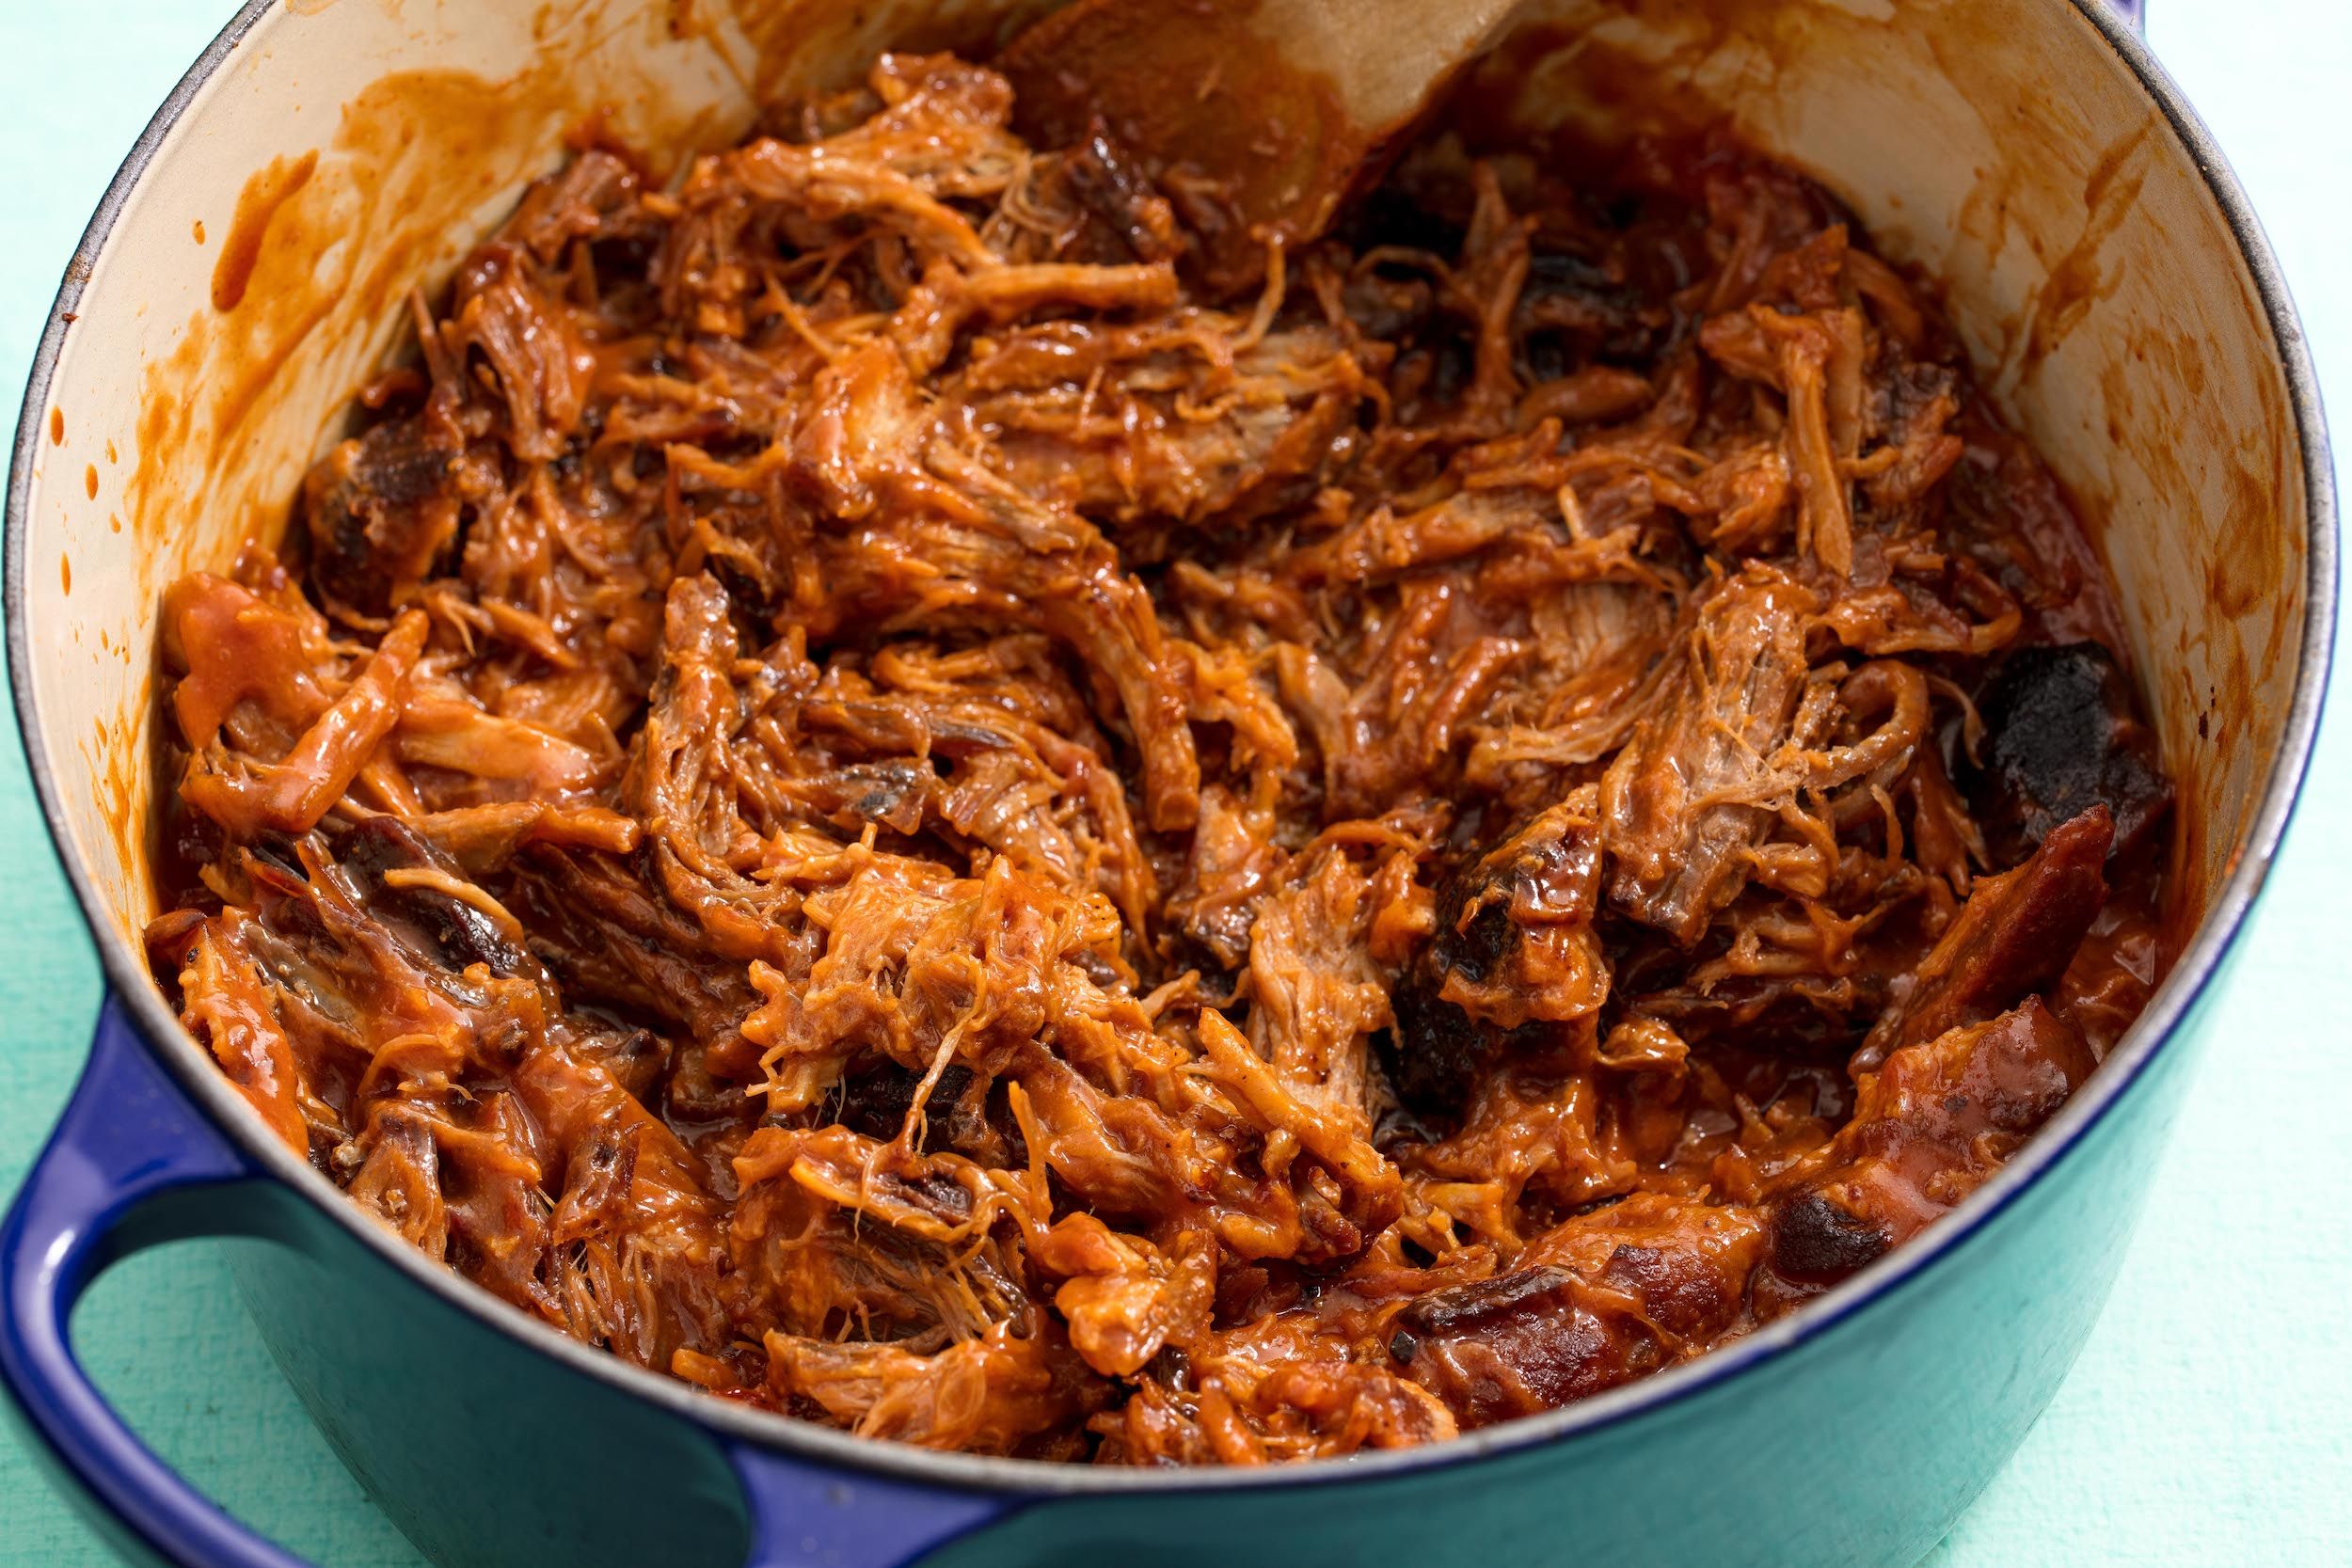 Why does my pulled pork not shred?